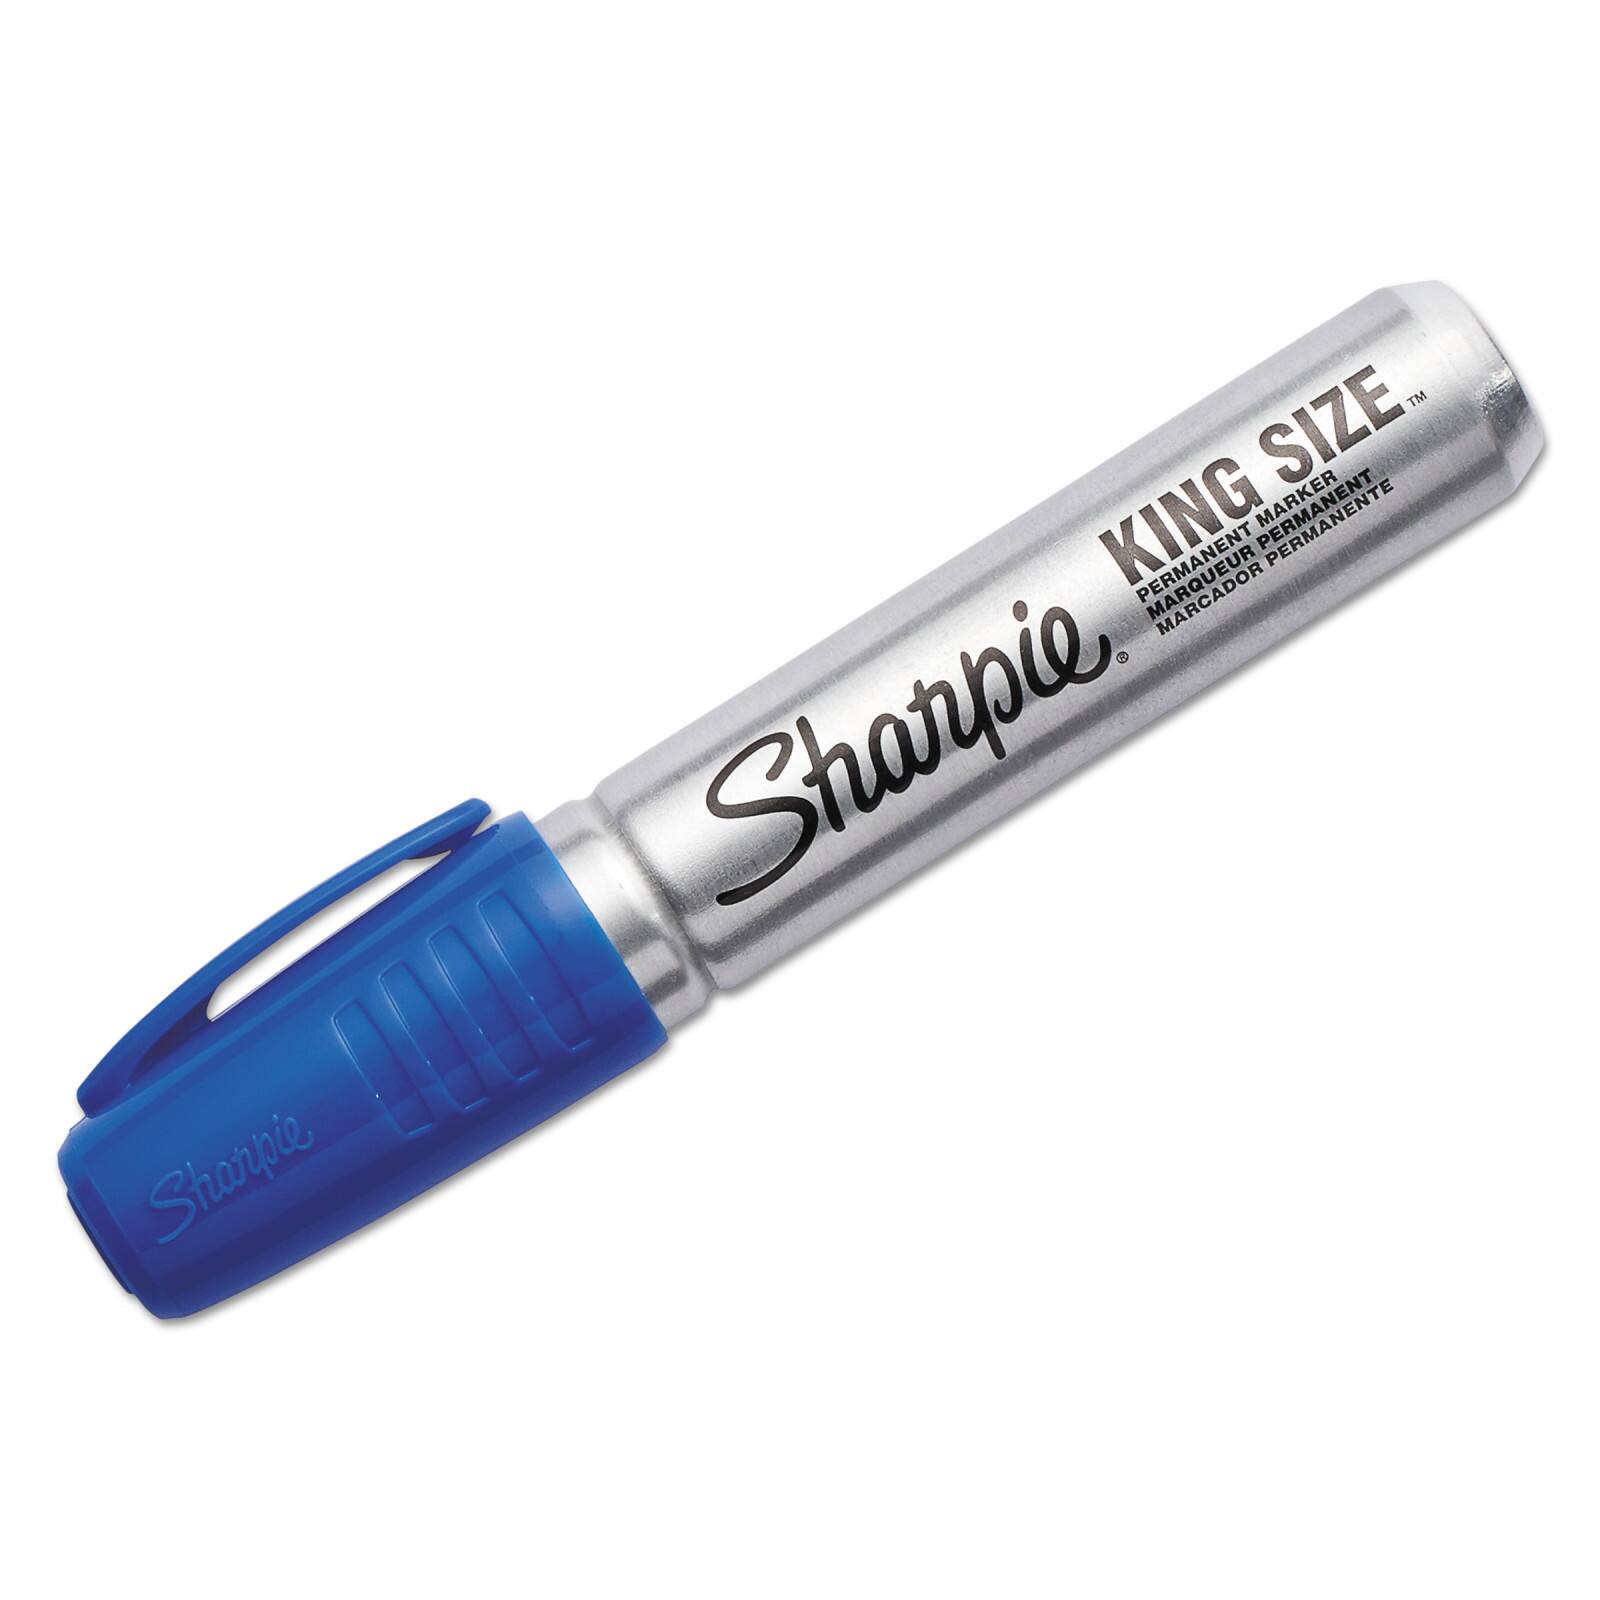 Sharpie&#xAE; Pro King Size Permanent Marker, 12ct.